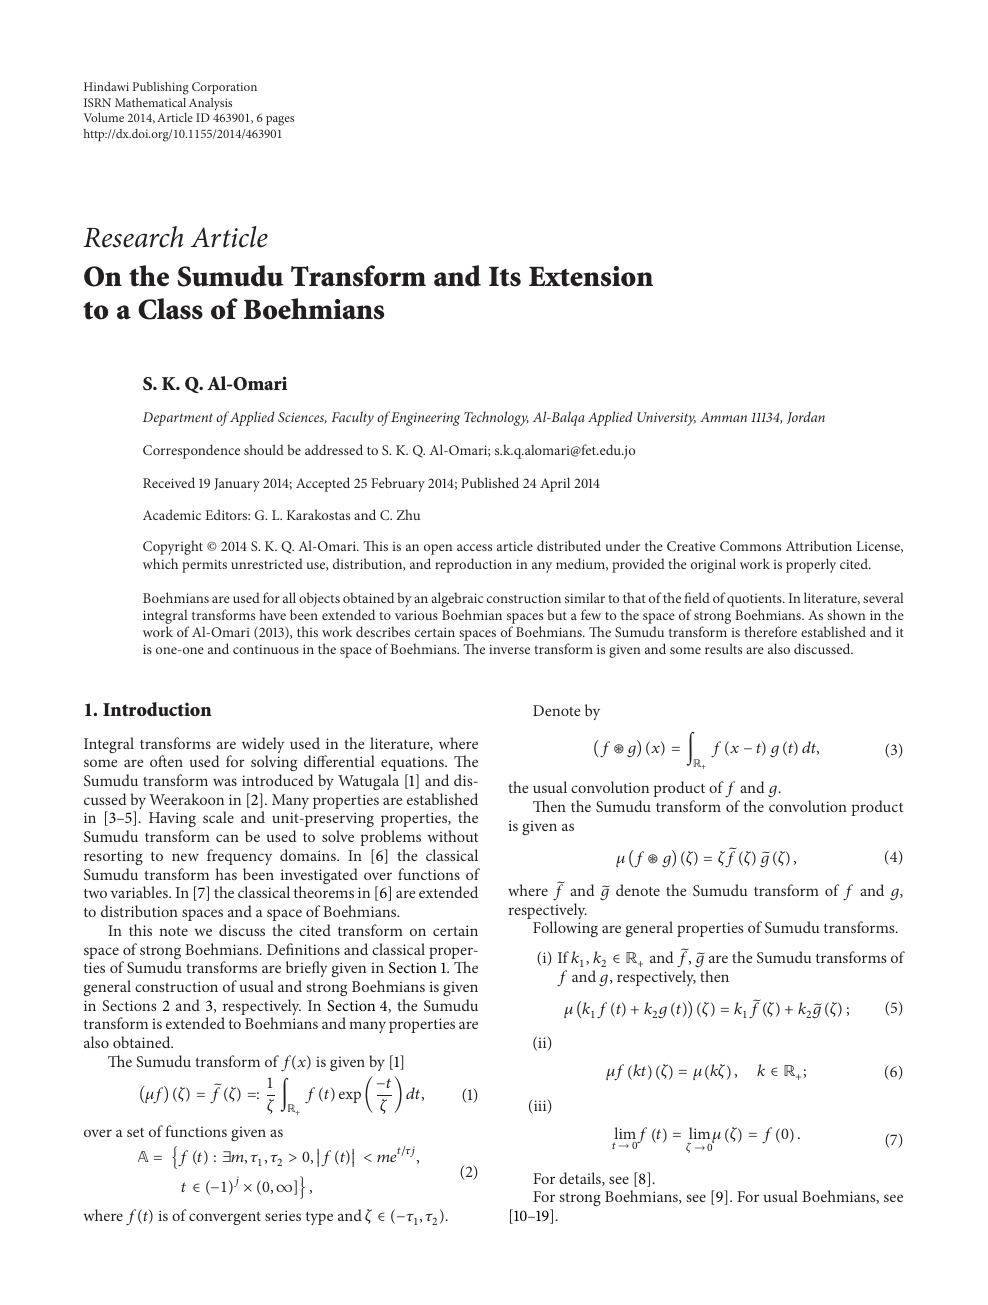 On The Sumudu Transform And Its Extension To A Class Of Boehmians Topic Of Research Paper In Mathematics Download Scholarly Article Pdf And Read For Free On Cyberleninka Open Science Hub